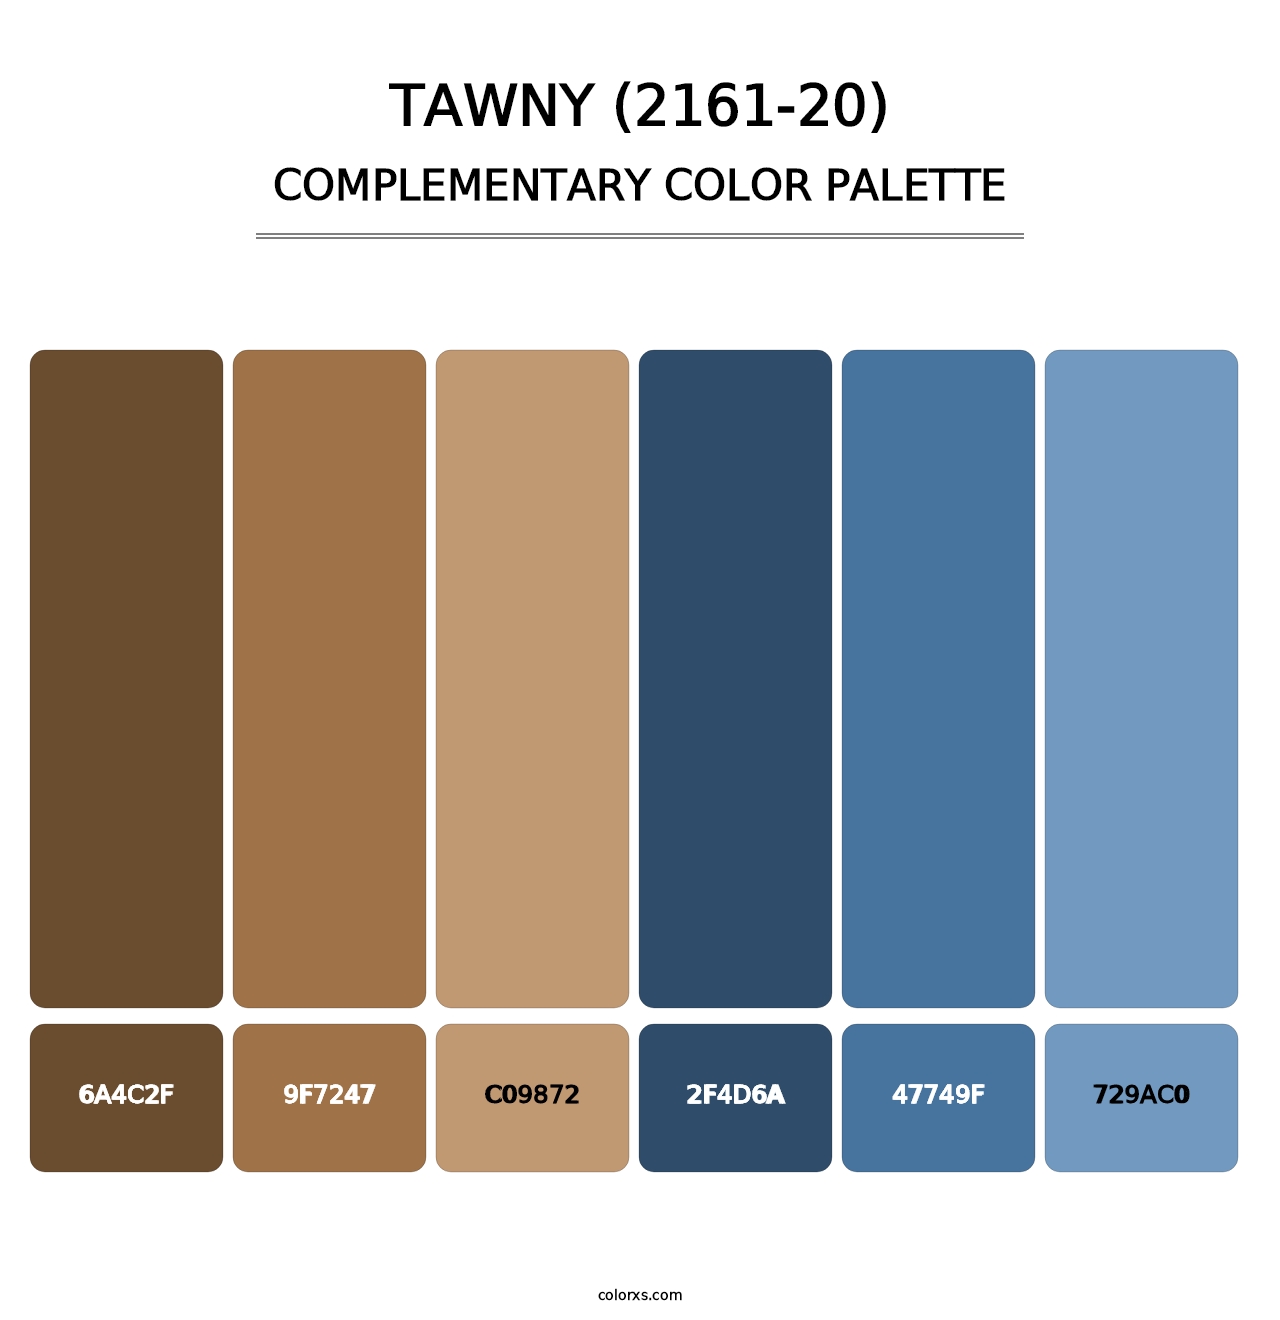 Tawny (2161-20) - Complementary Color Palette